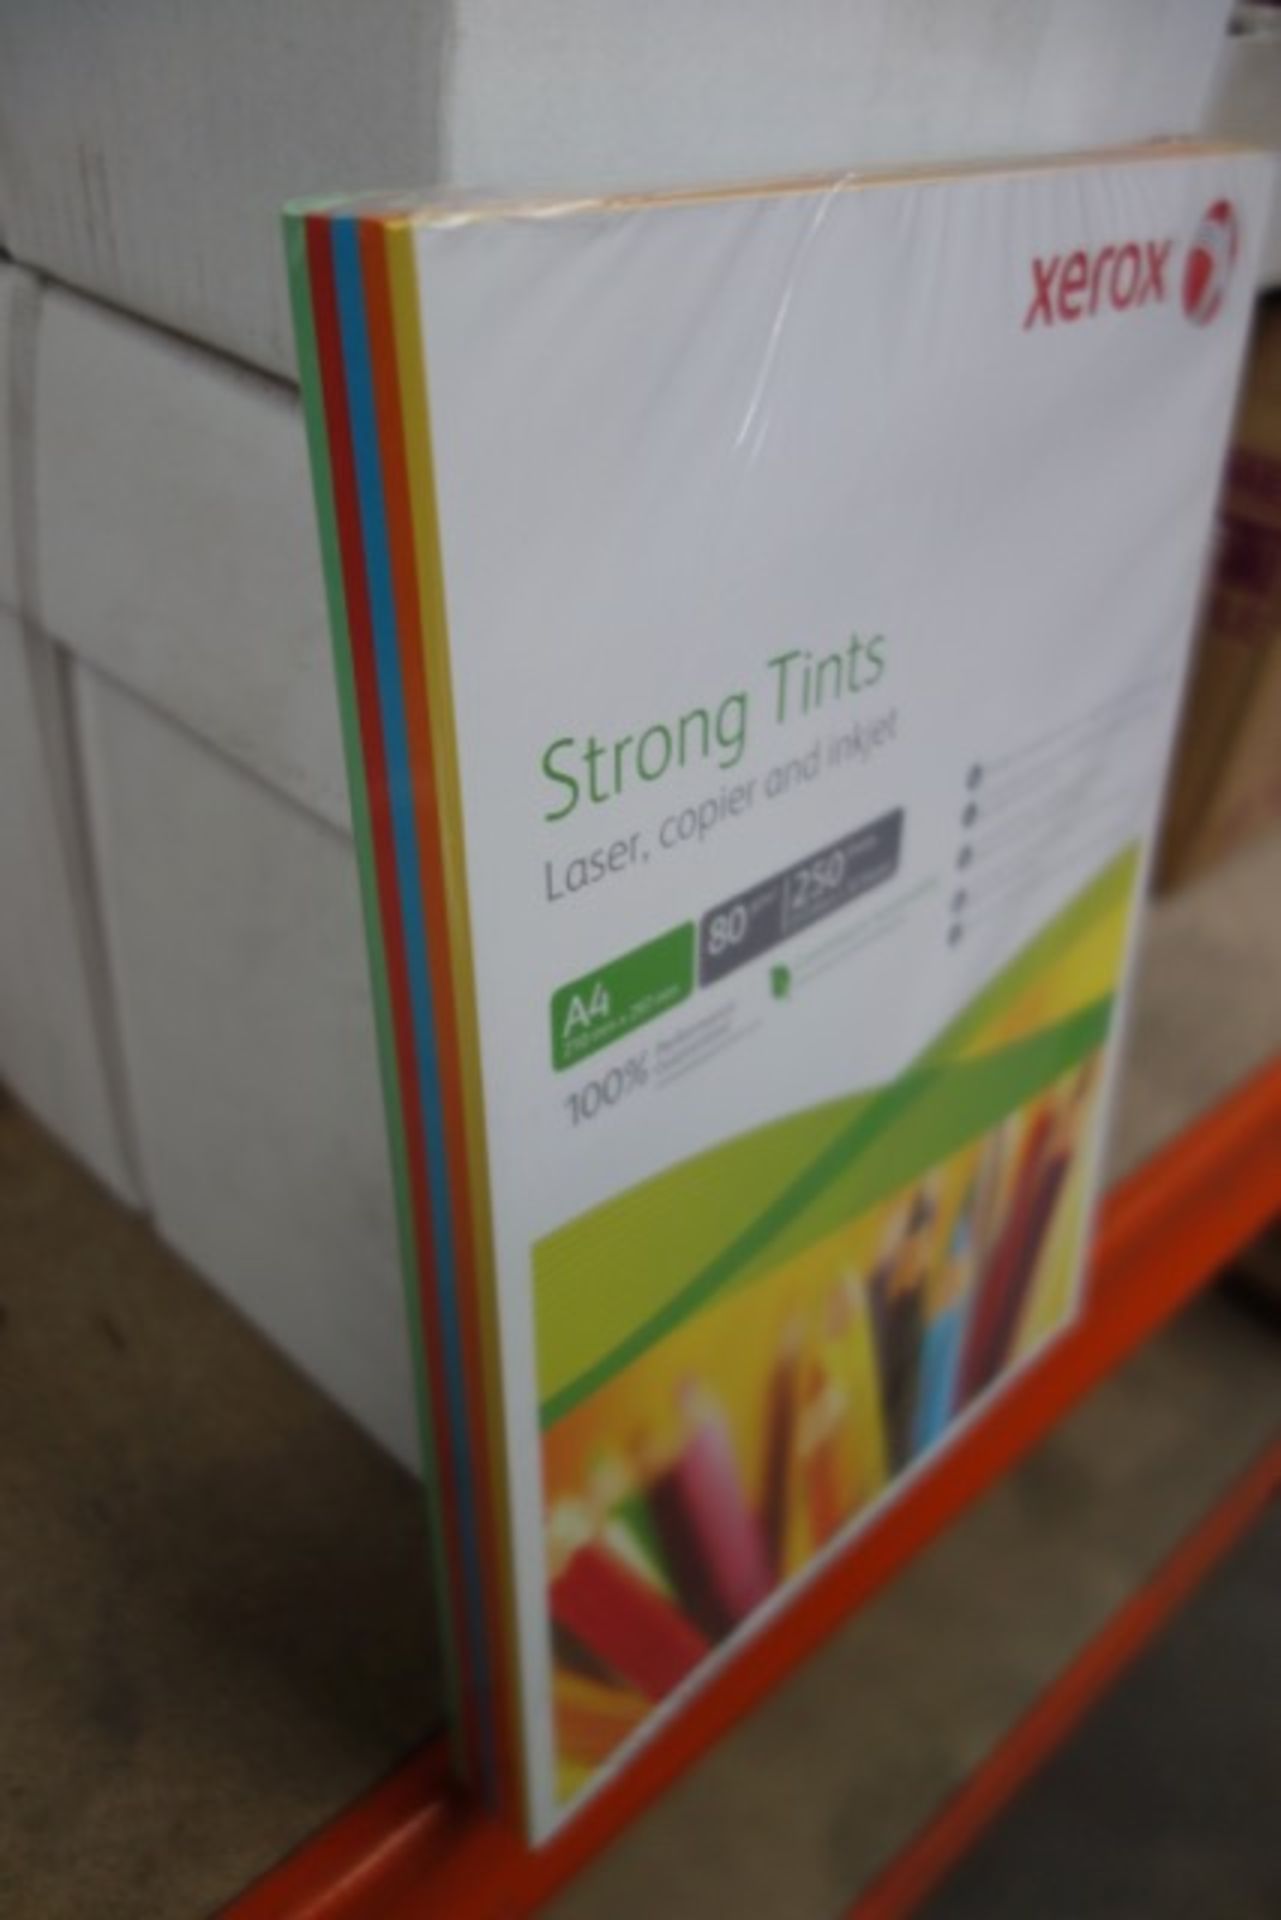 20 x Packs of A4 Xerox Strong Tints Laser, Copier & Inkjet Paper. 250 Sheets per pack in 5 - Image 2 of 2